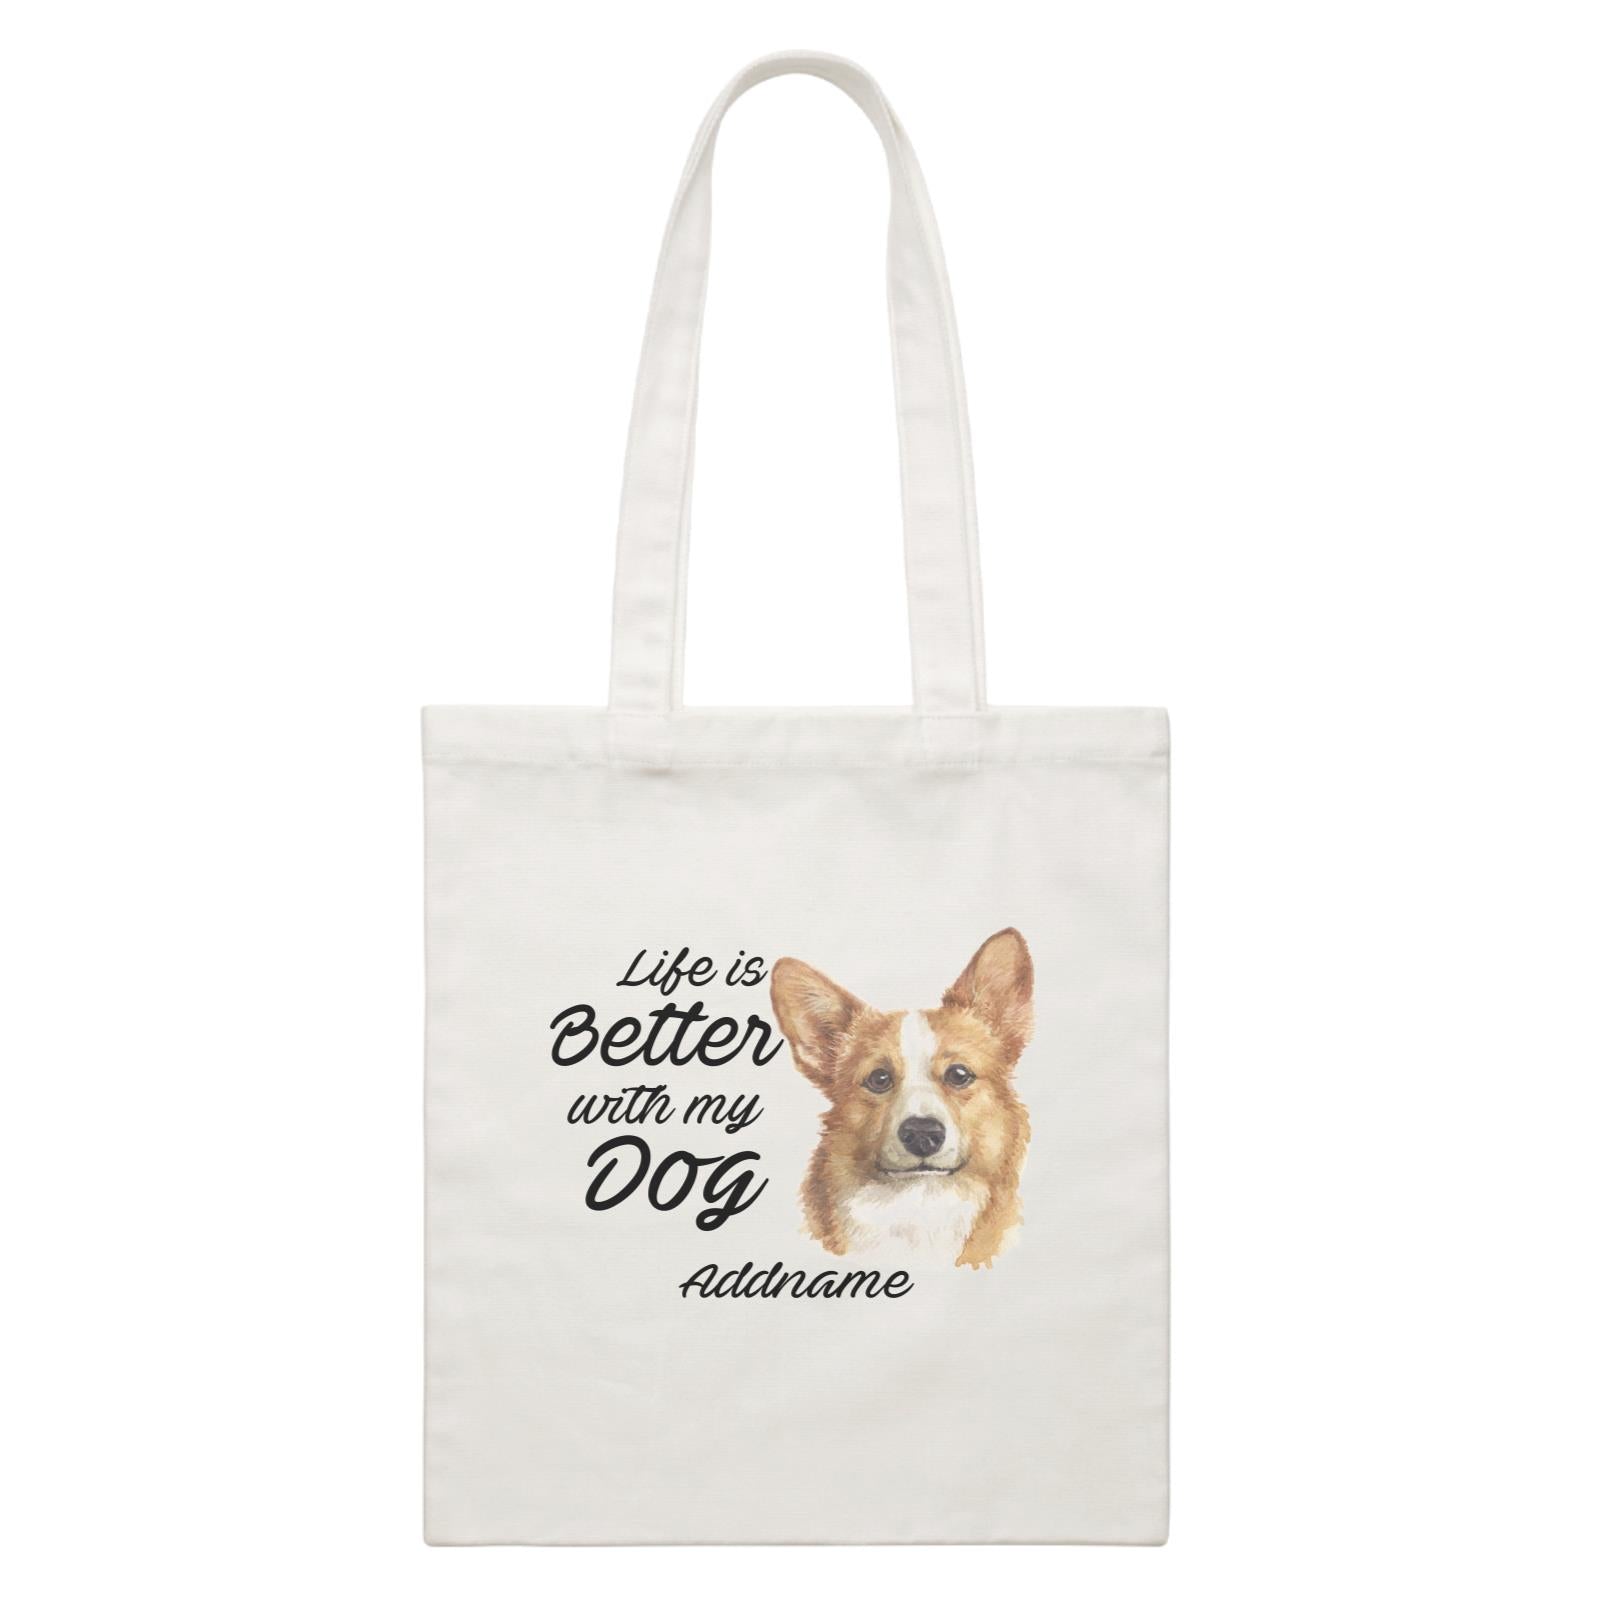 Watercolor Life is Better With My Dog Welsh Corgi Addname White Canvas Bag